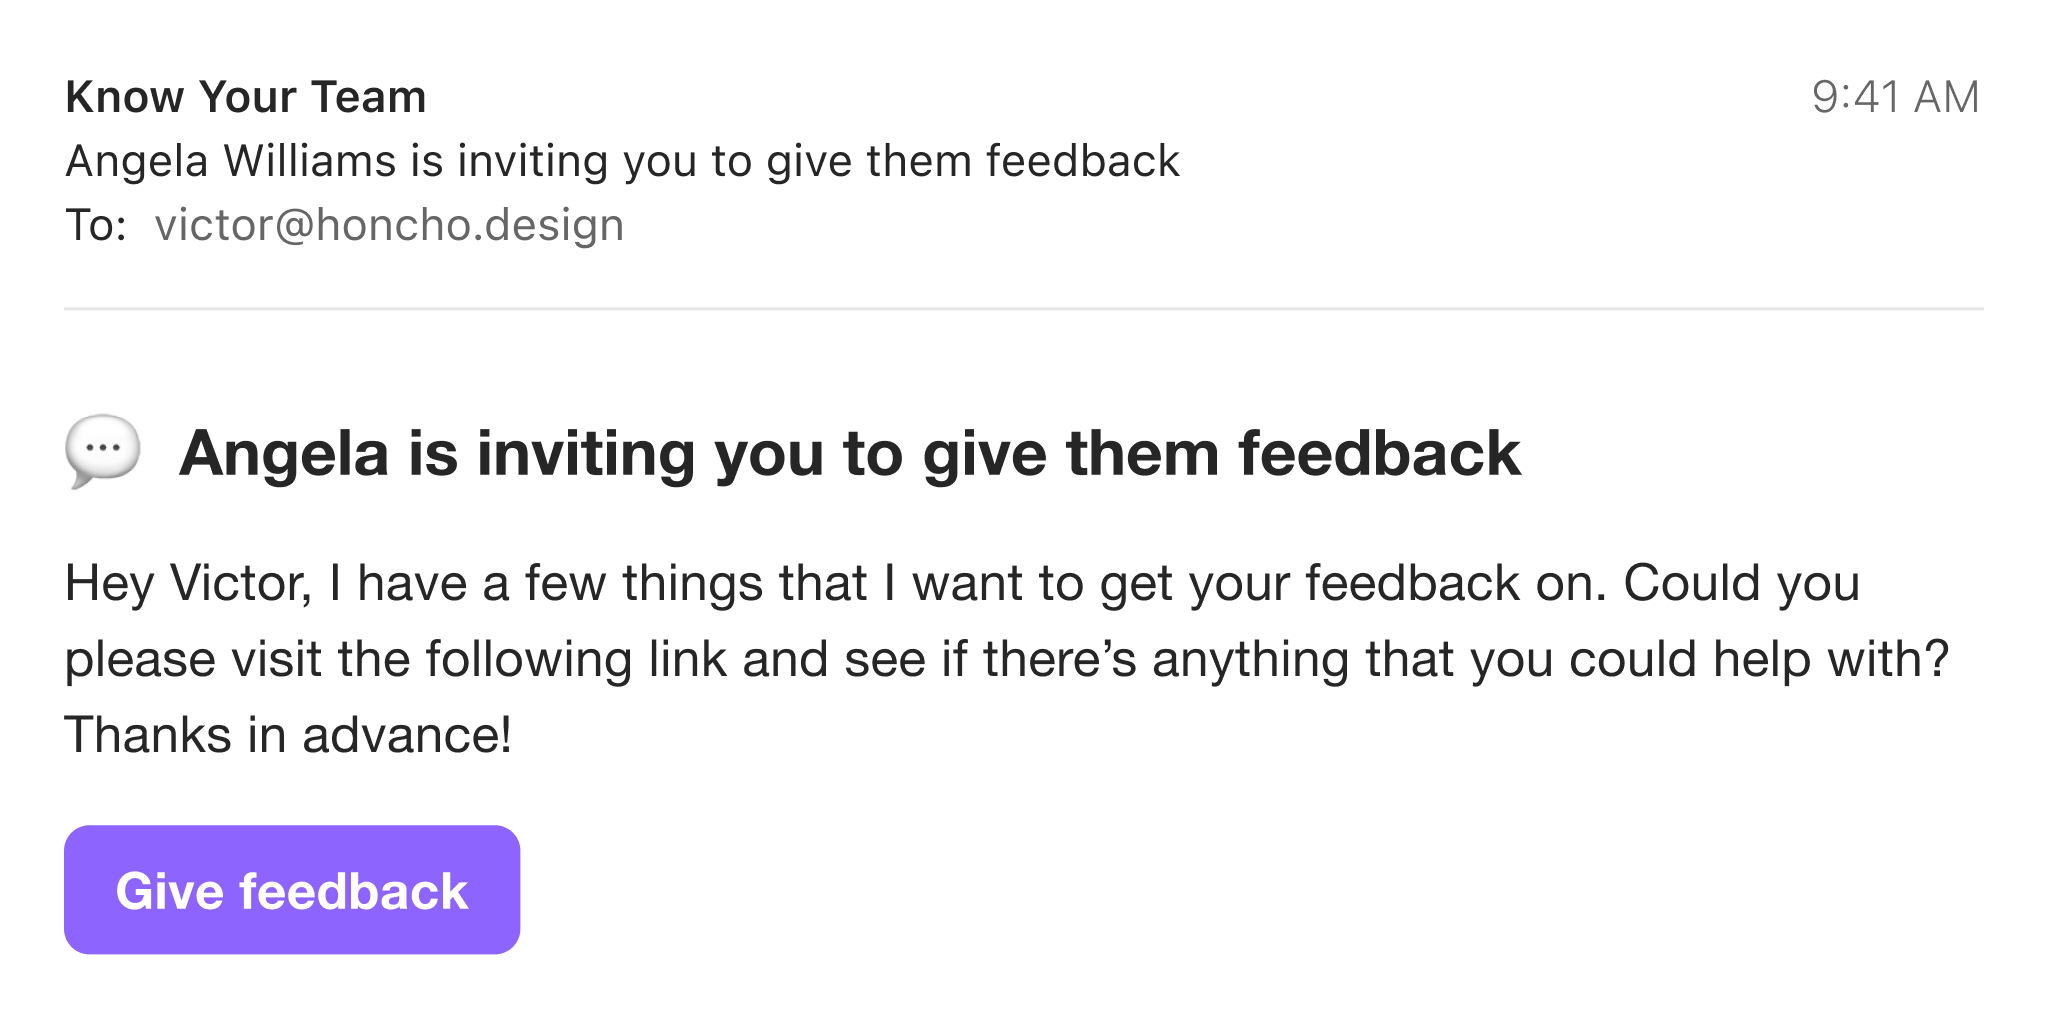 An email invitation to give someone feedback